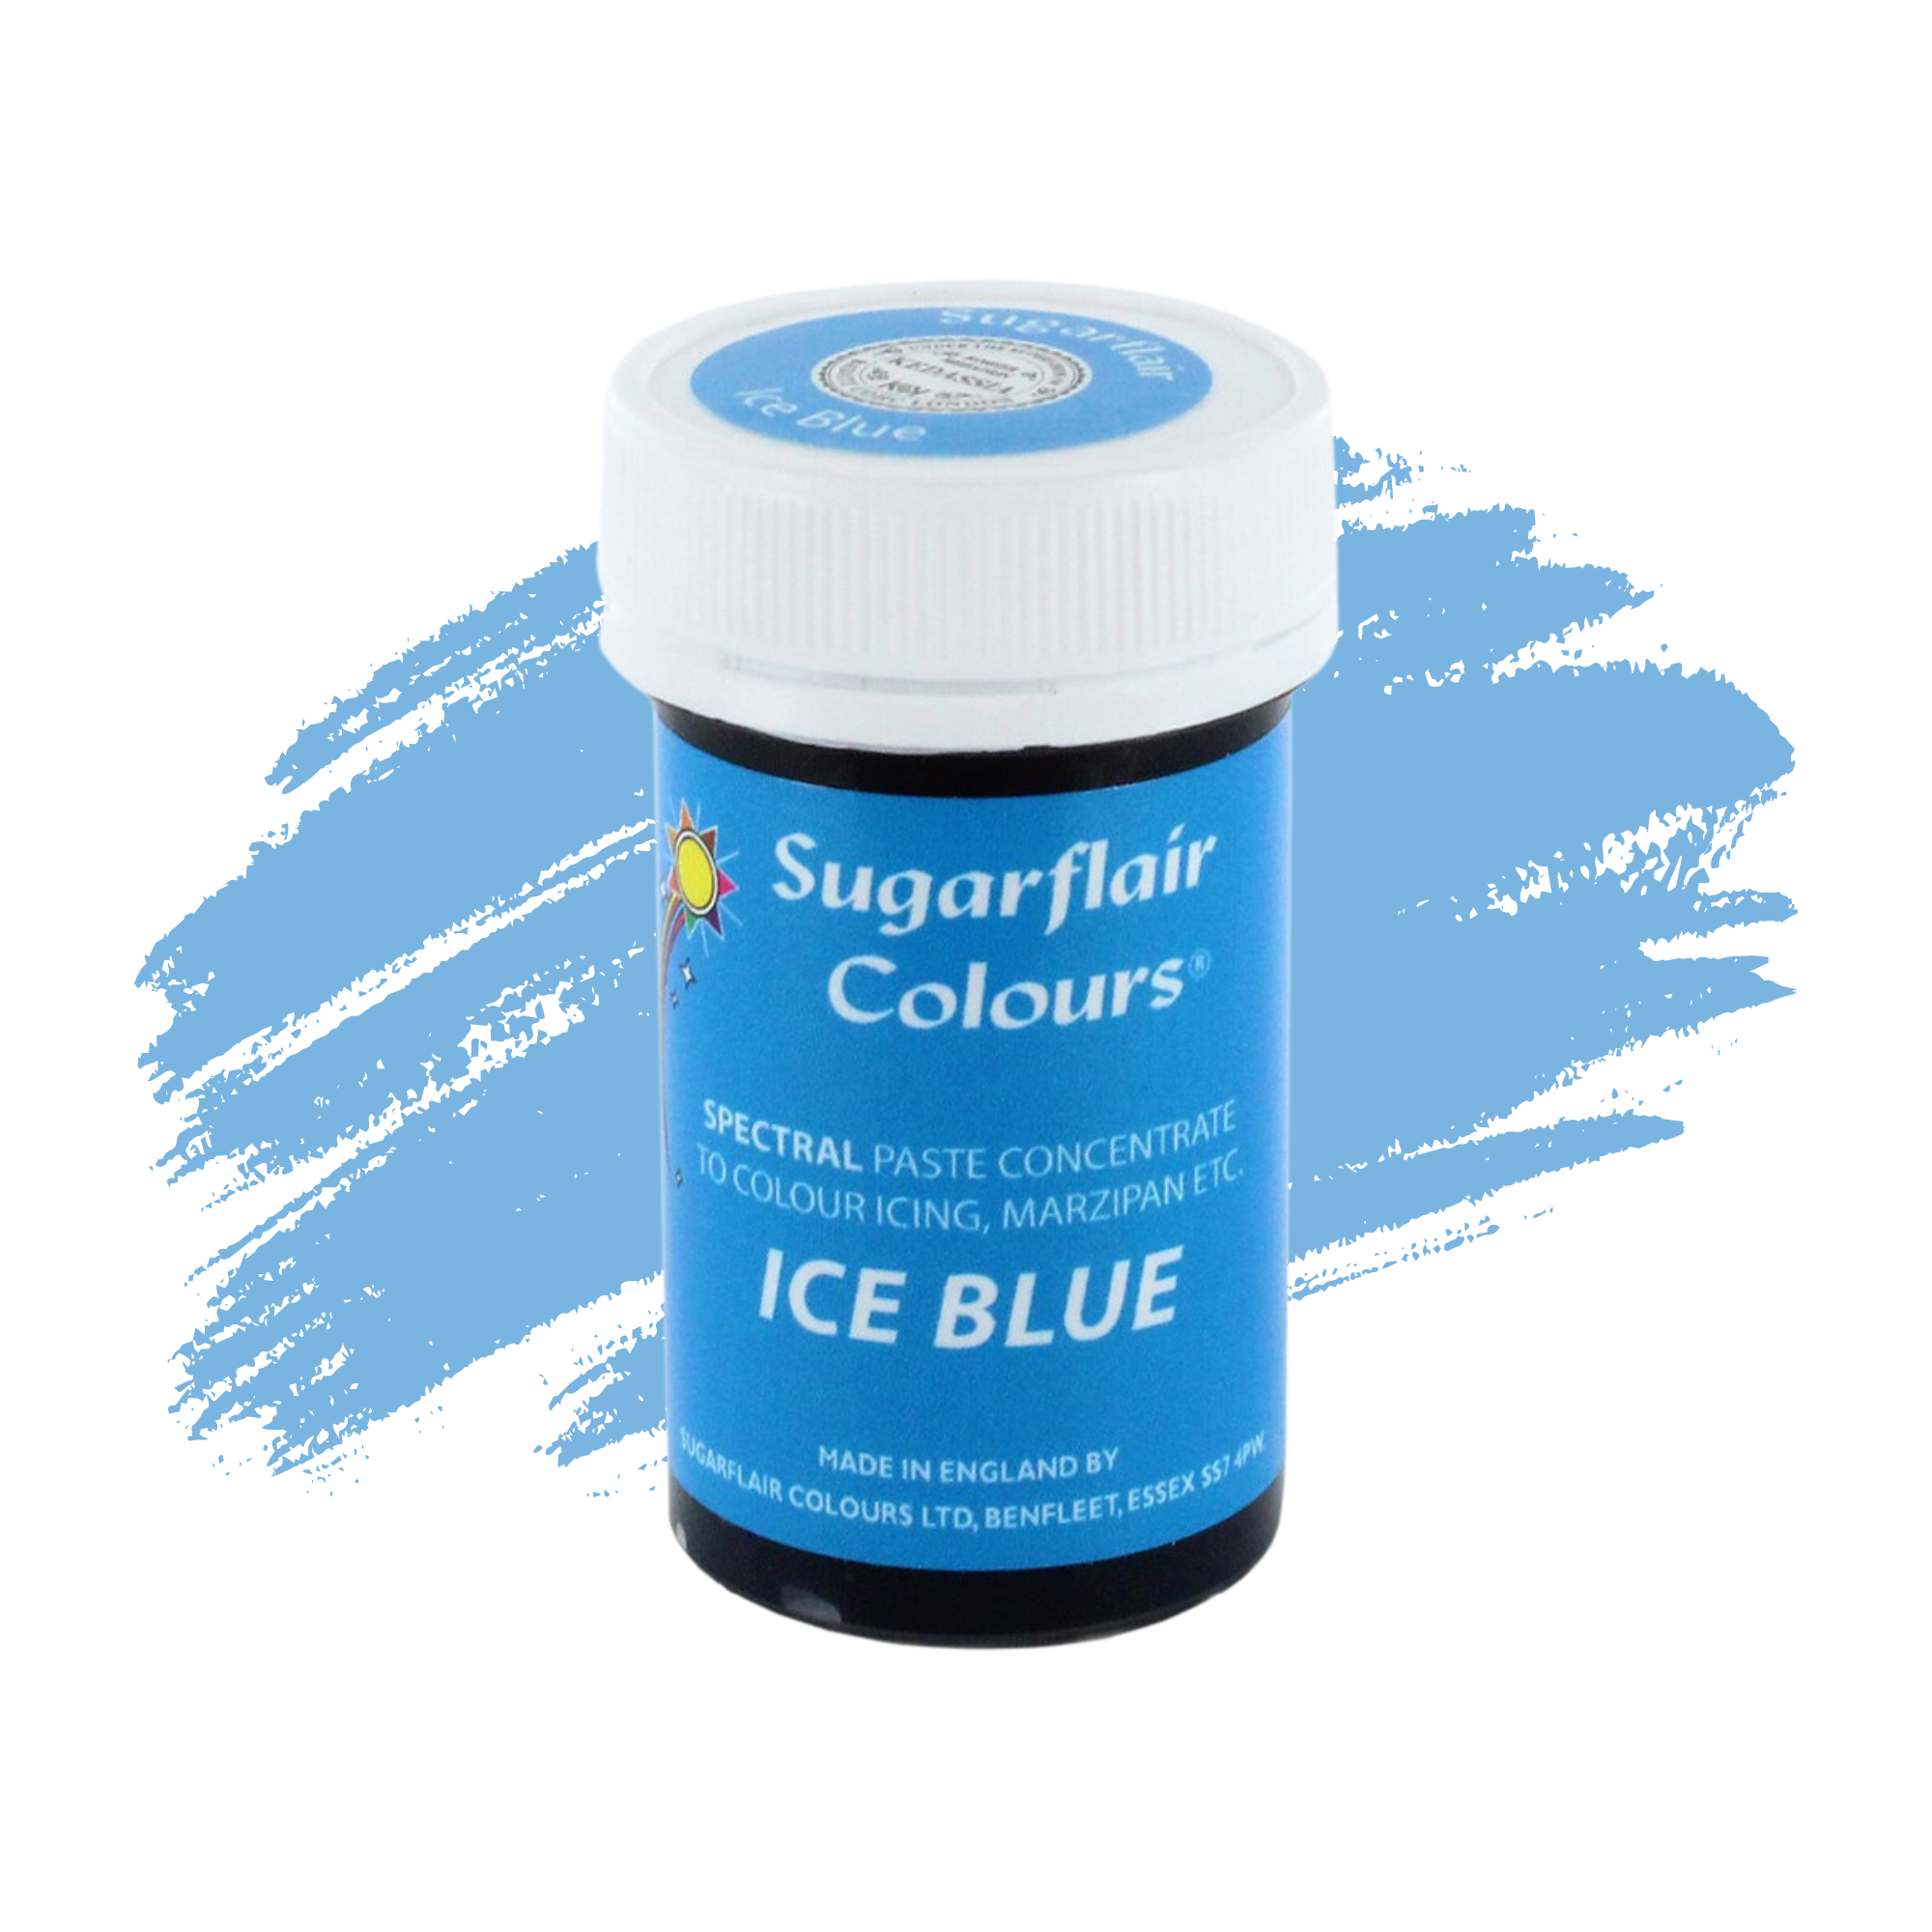 Sugarflair Paste Colours Concentrated Food Colouring - Spectral Ice Blue - 25g